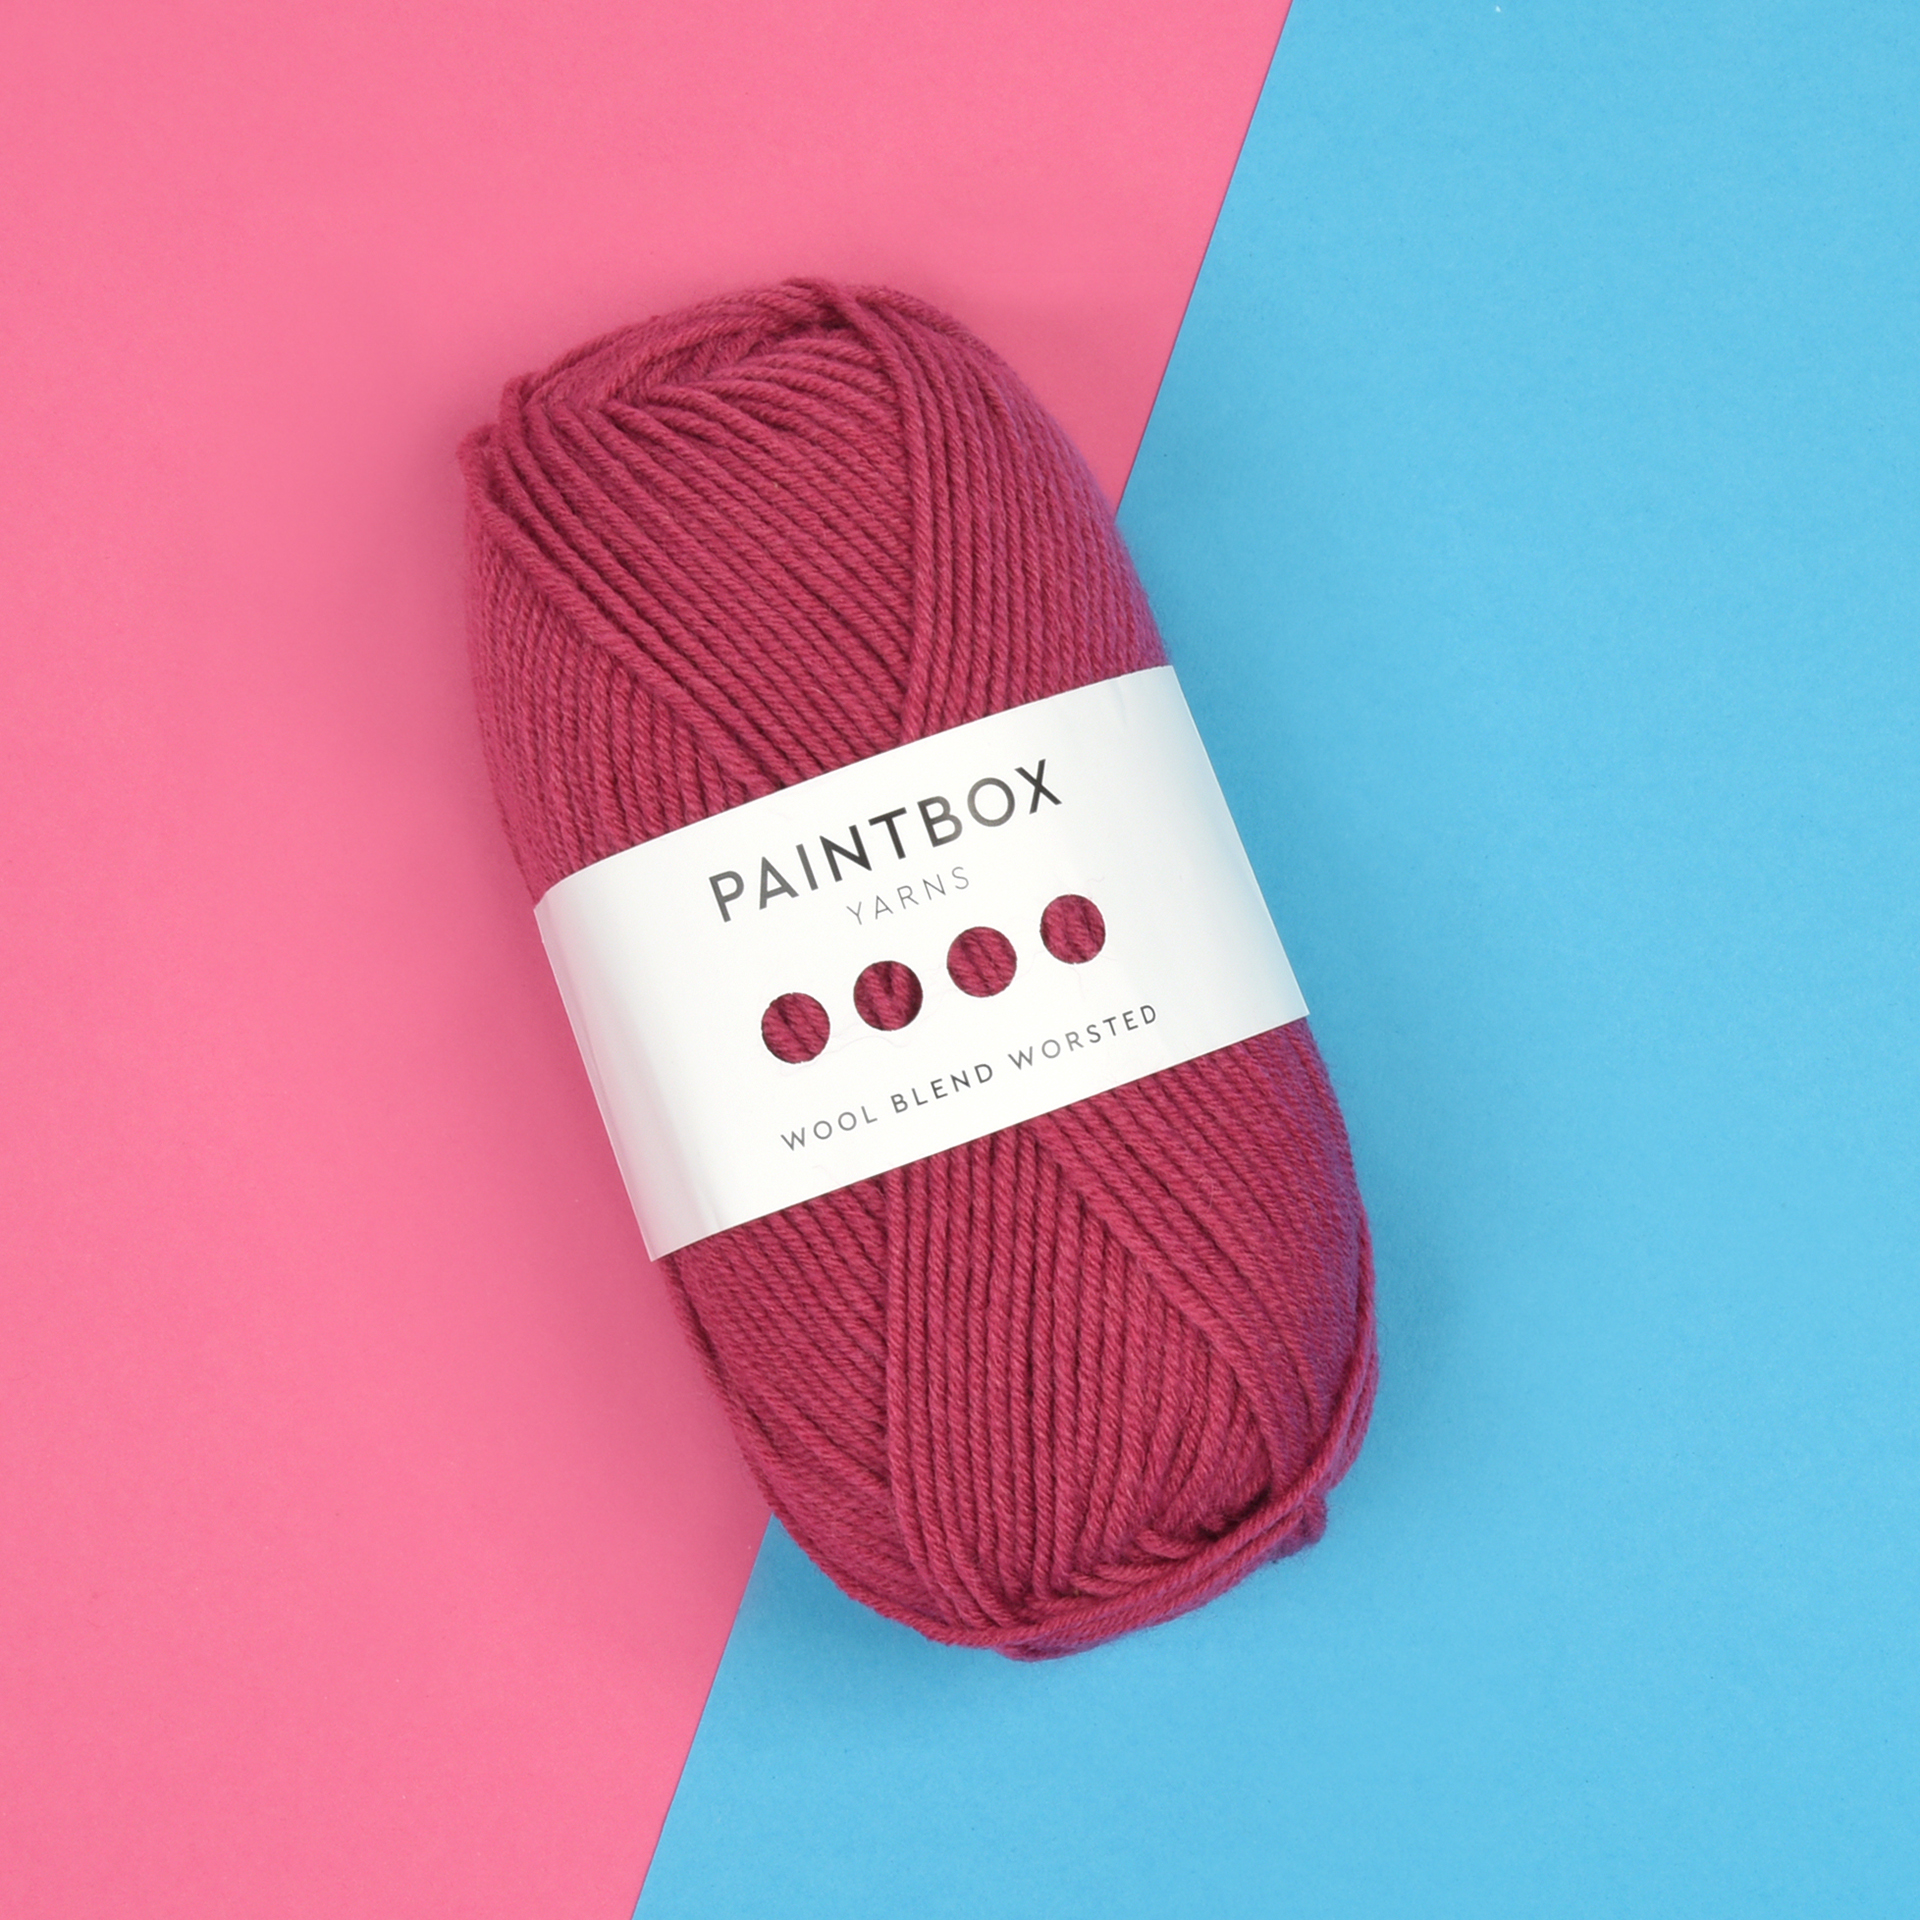 Paintbox Yarns Wool Blend Worsted (100g) – Paintbox Yarns